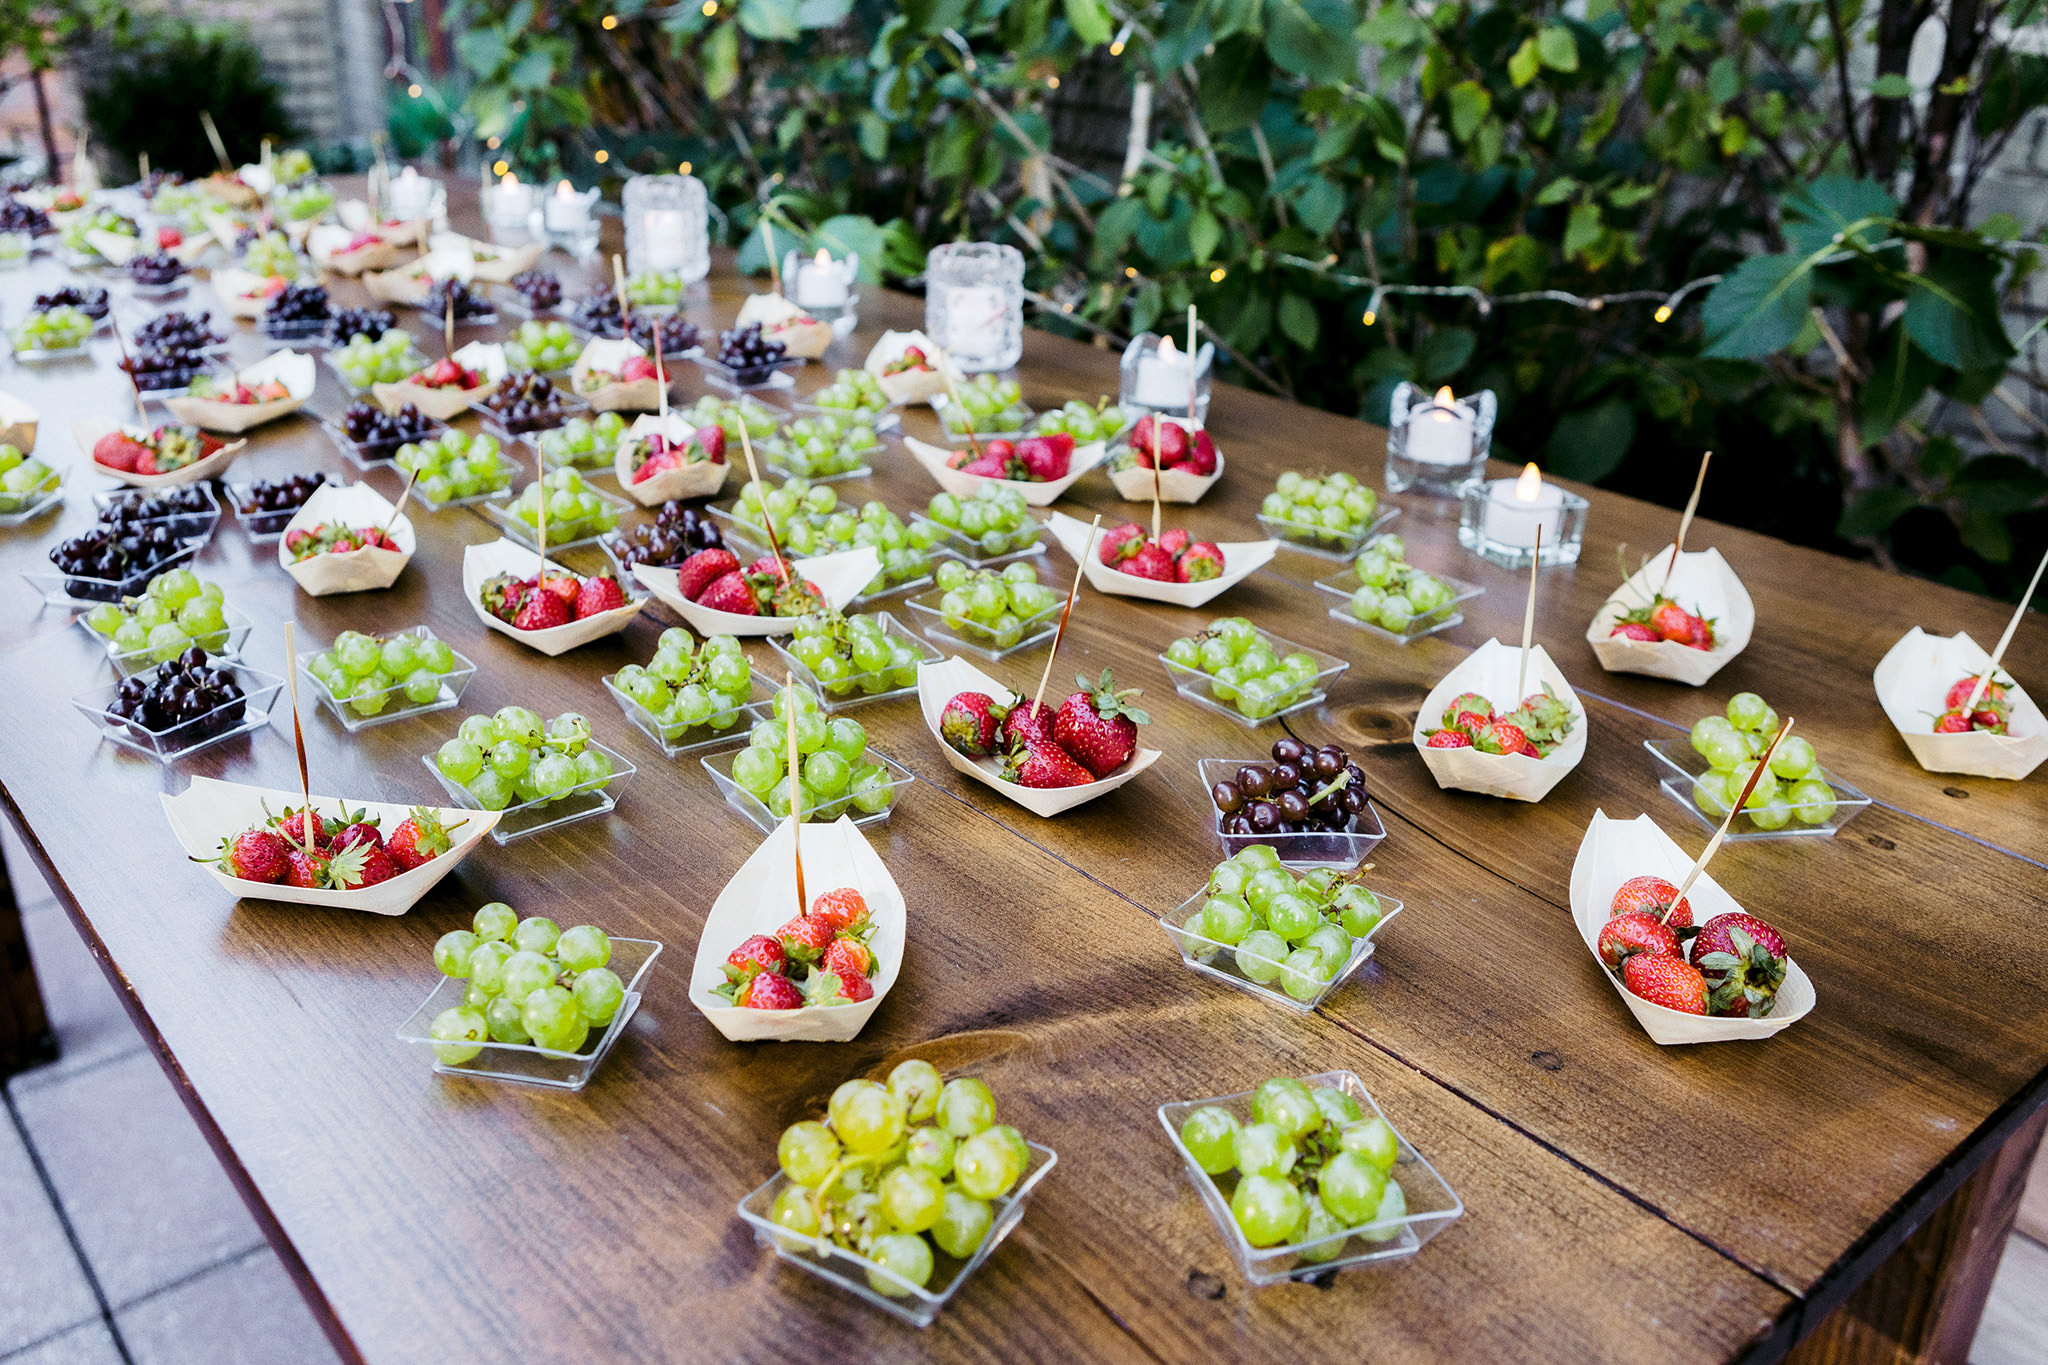 Individual servings of fruits for a wedding reception. 2022 NYC wedding trends image by Jenny Fu Studio